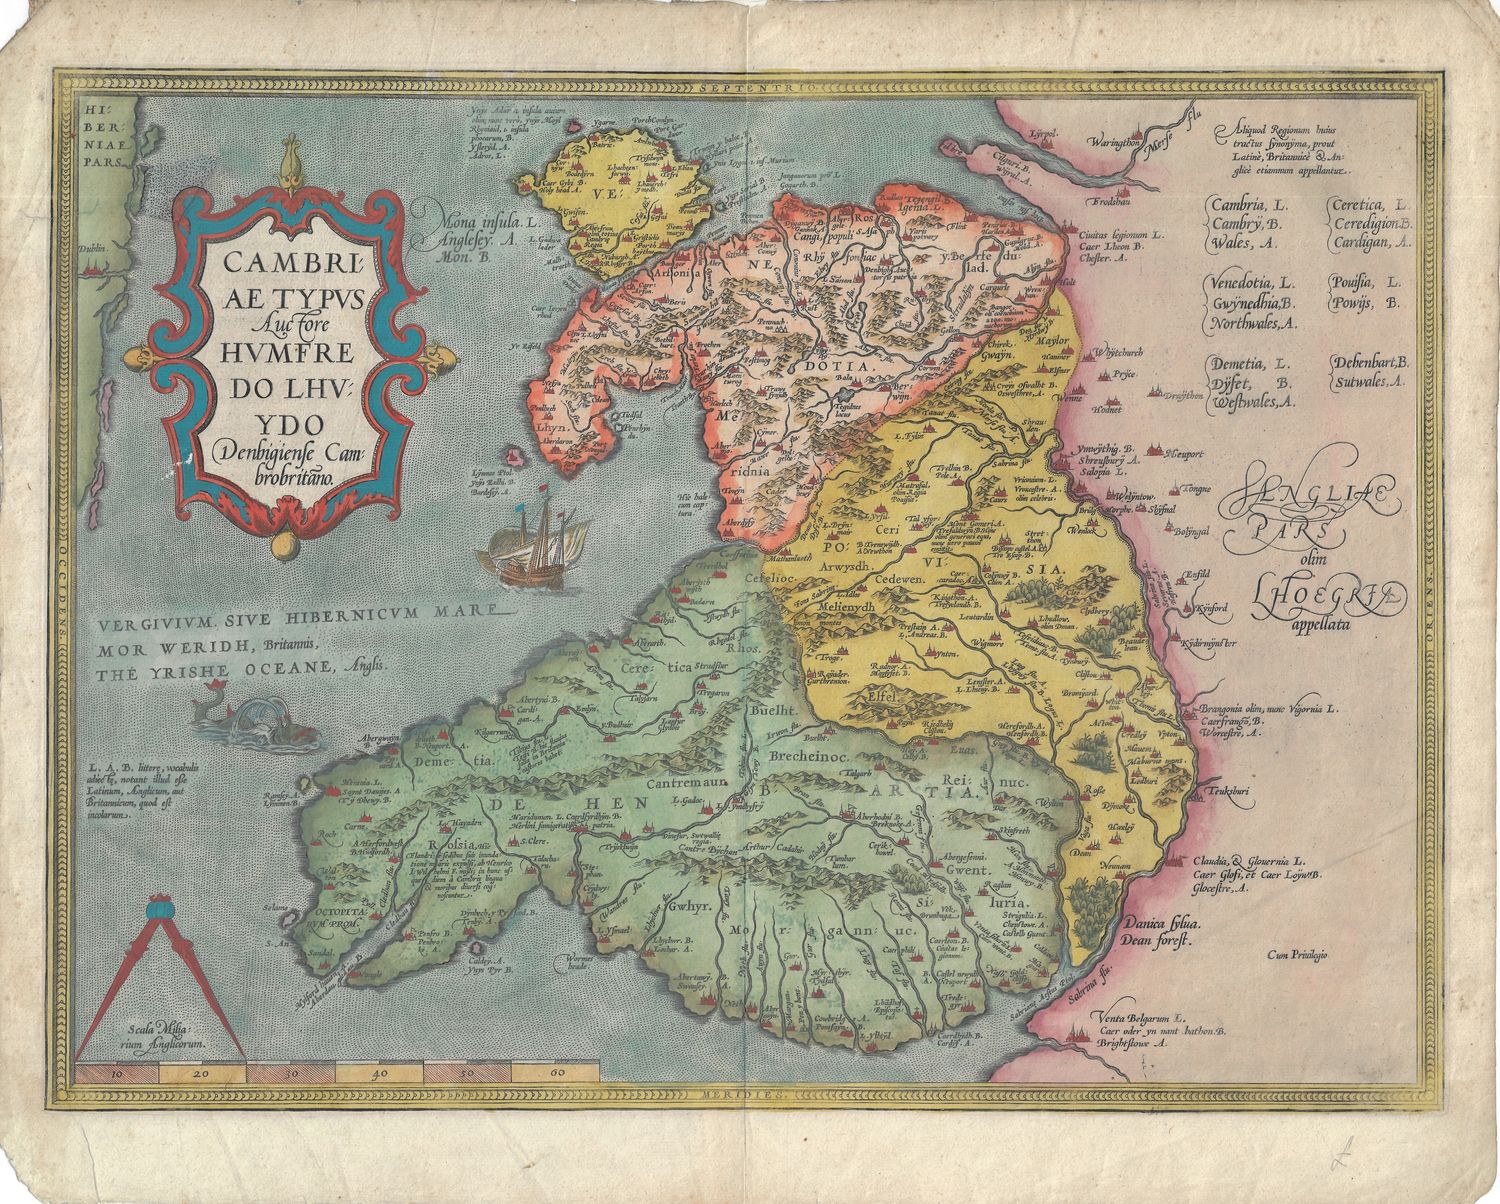 1574 Cambriae typus auctore Humfredo Lhuydo-North Wales by Abraham Ortelius